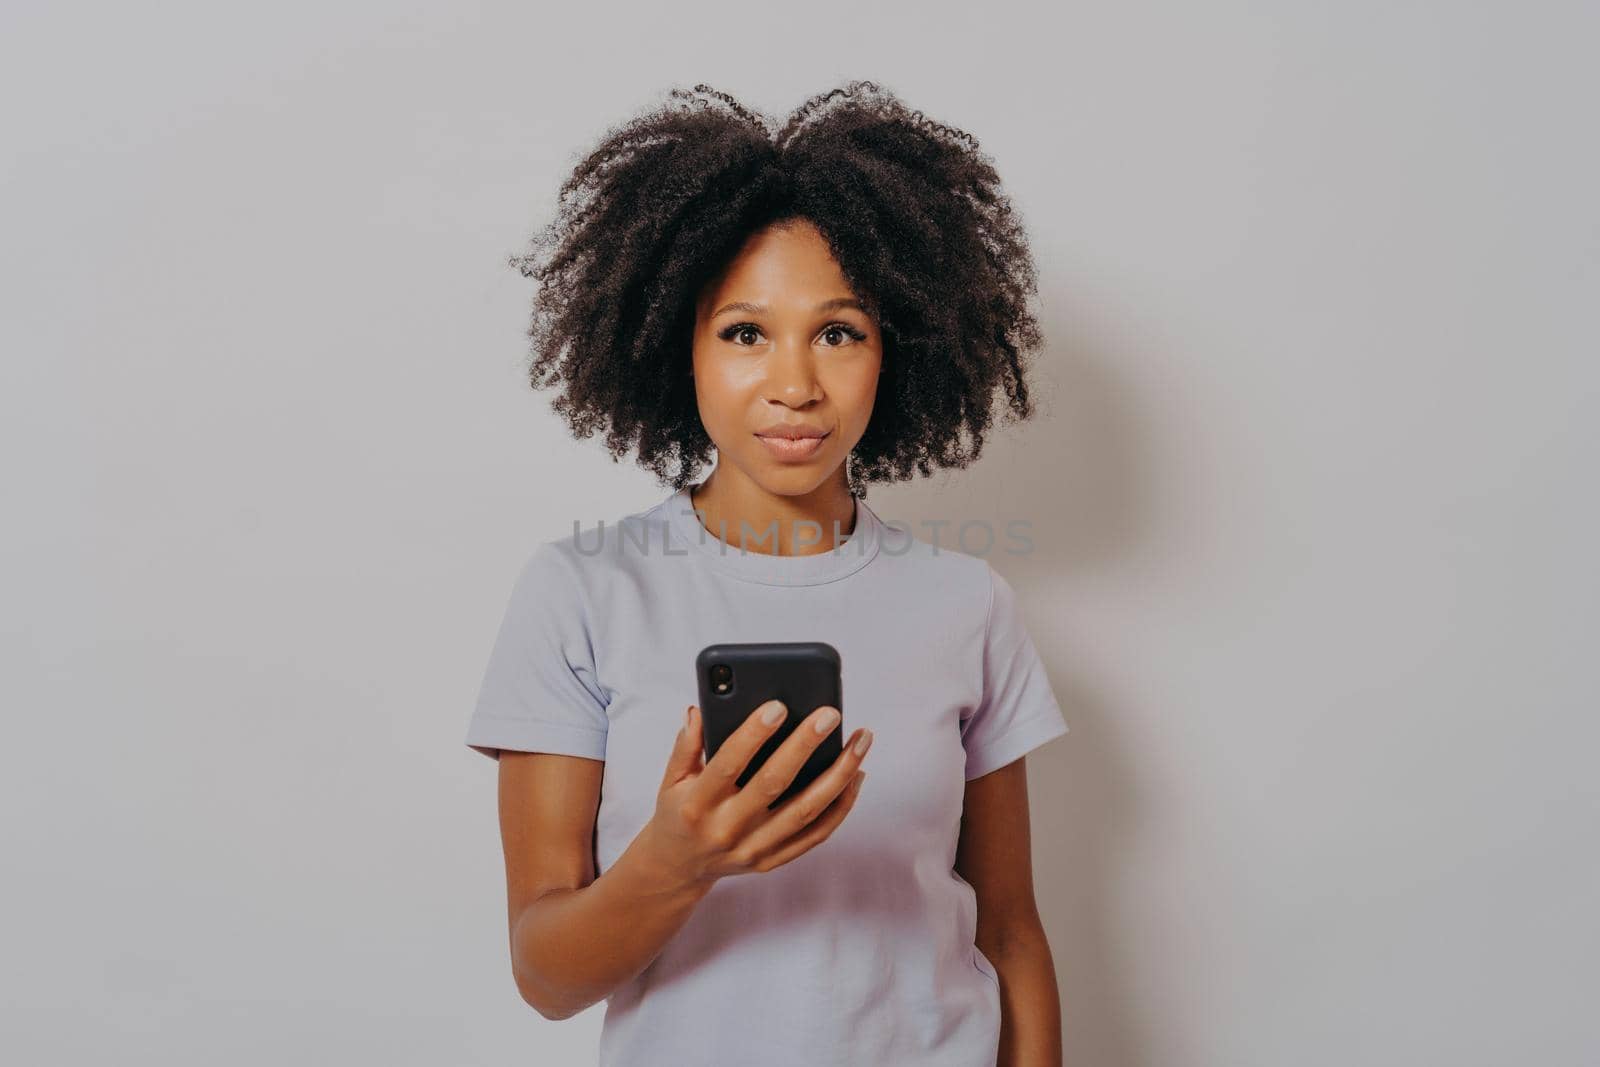 Studio portrait of young african american female with curly hair using mobile phone and looking at camera, mixed race woman with modern smartphone in hands isolated on light background